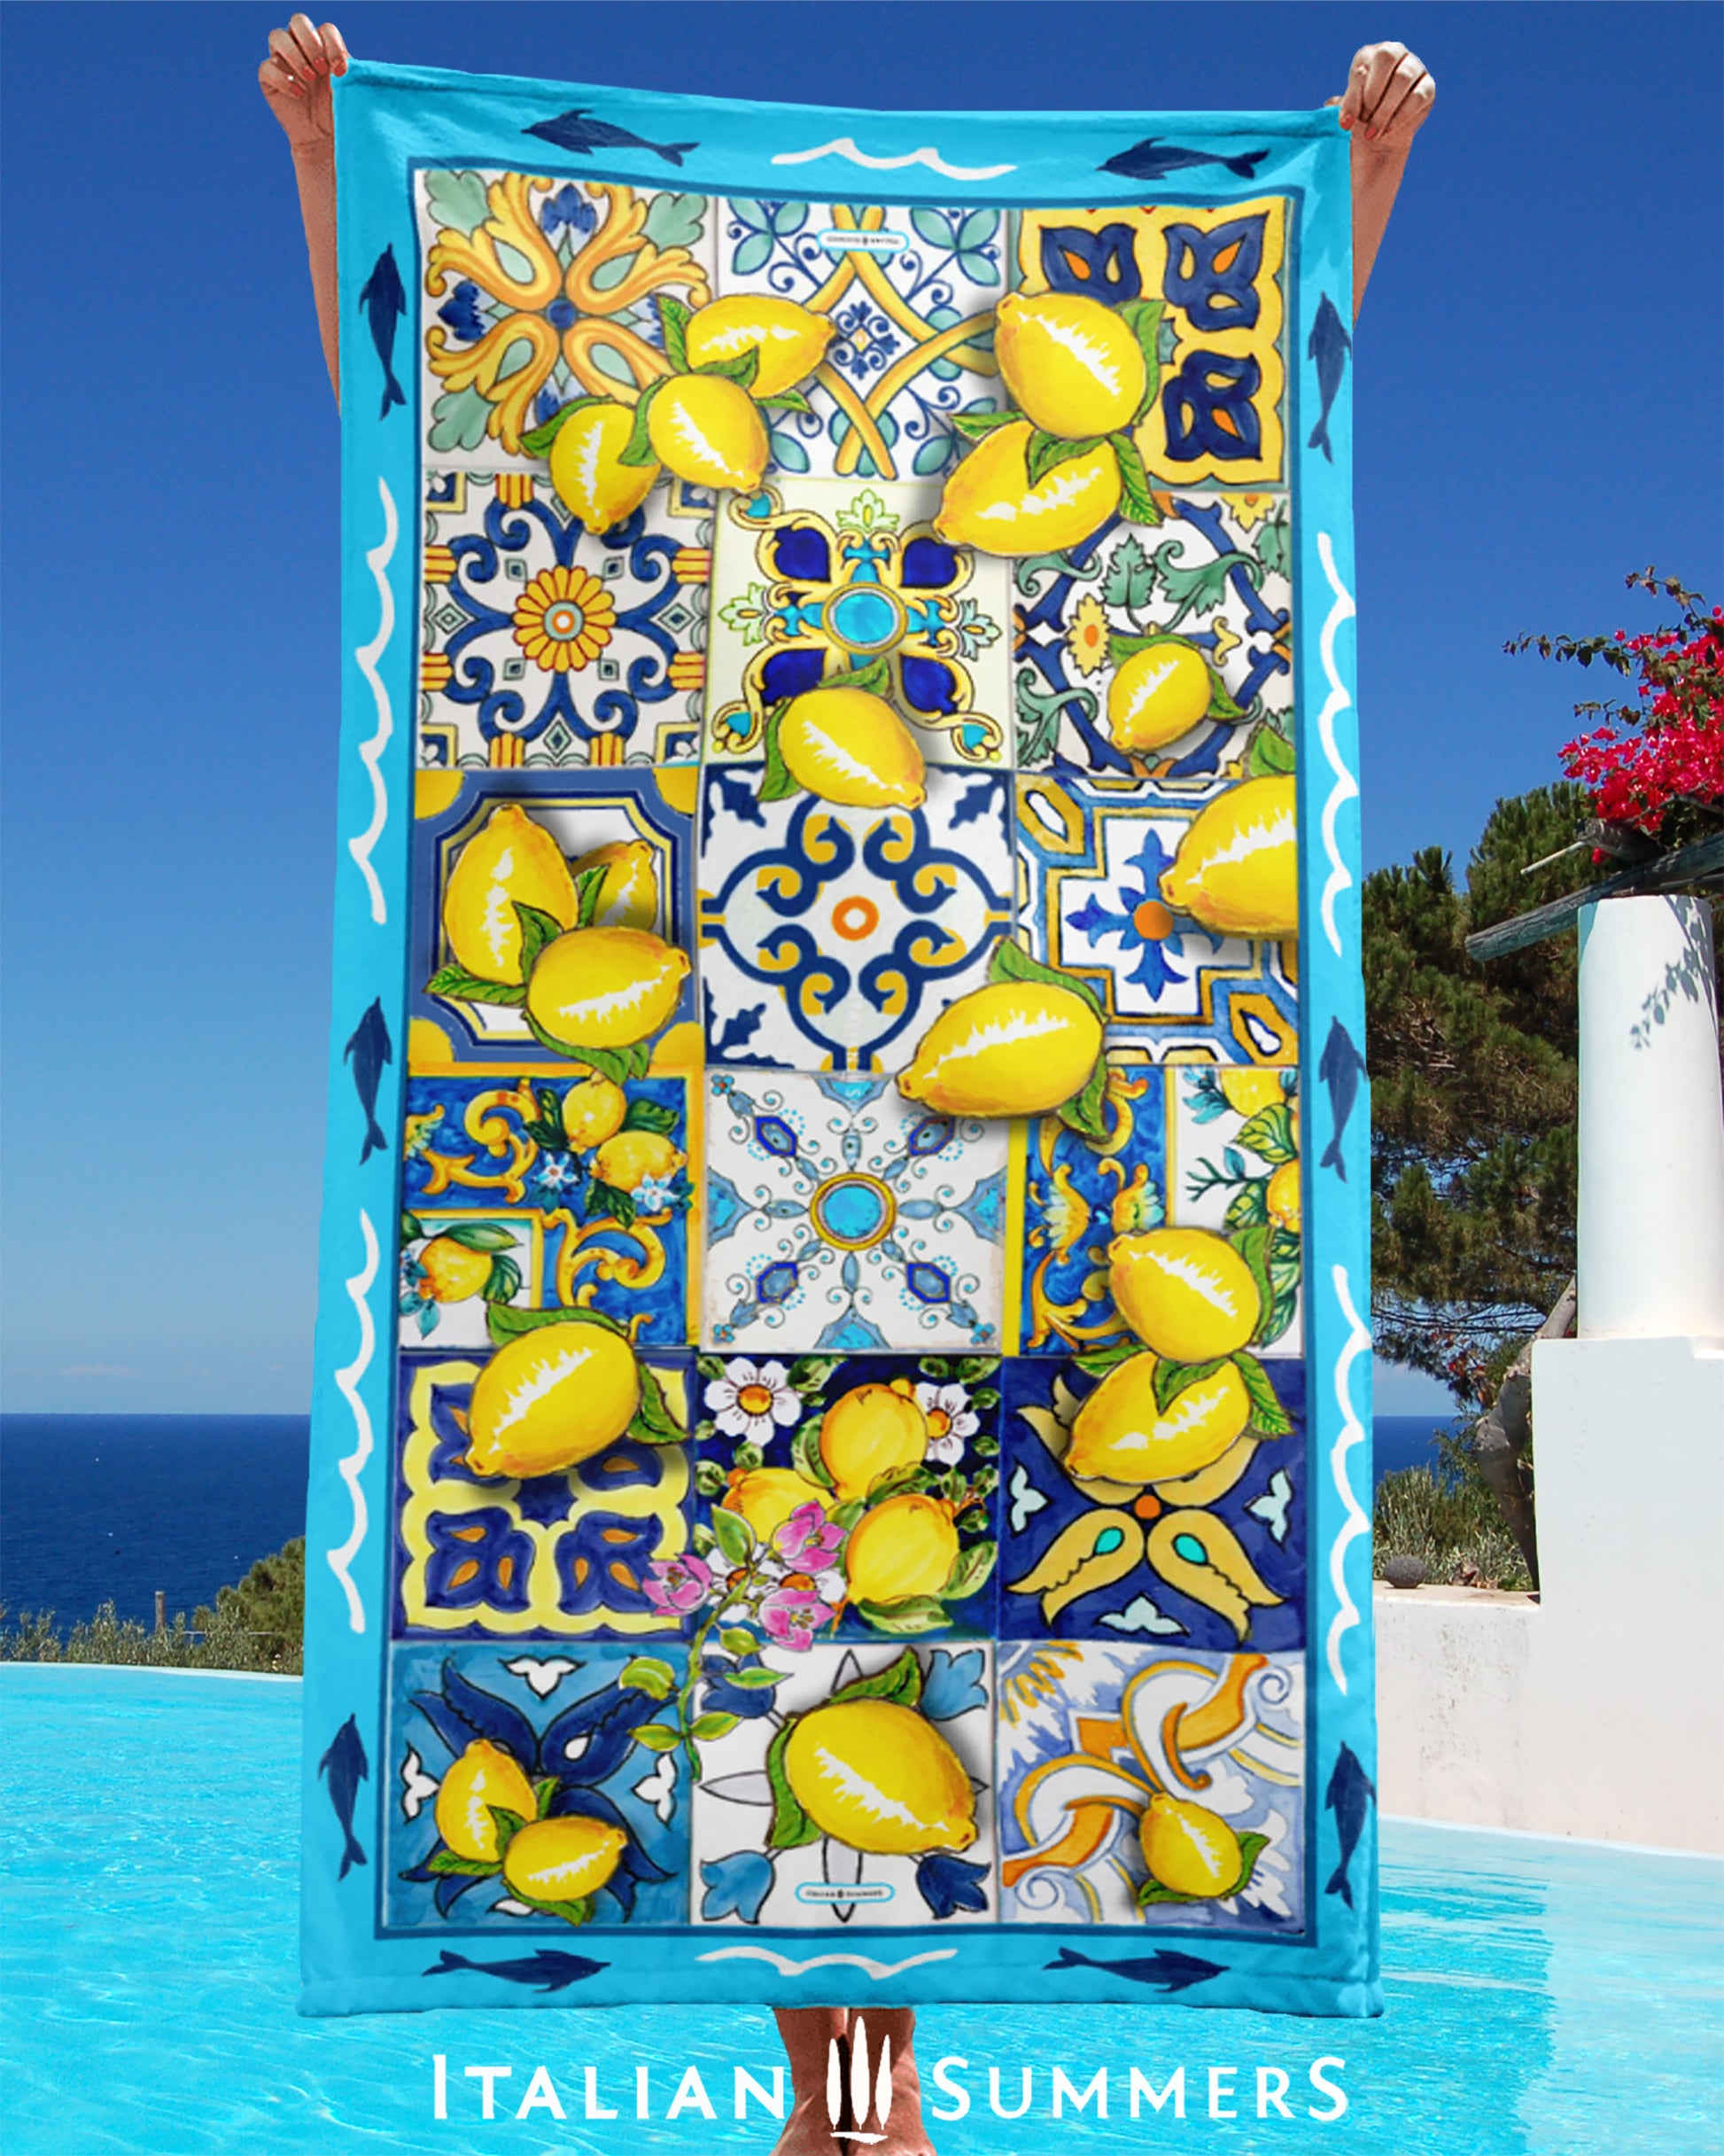 Beautiful Italy inspired beach towel printed with a turquoise rim with dolphins and a field of multi-colored italian maiolica tiles strewn with bunches of Sorrento lemons with flowers. Made by Italian Summers